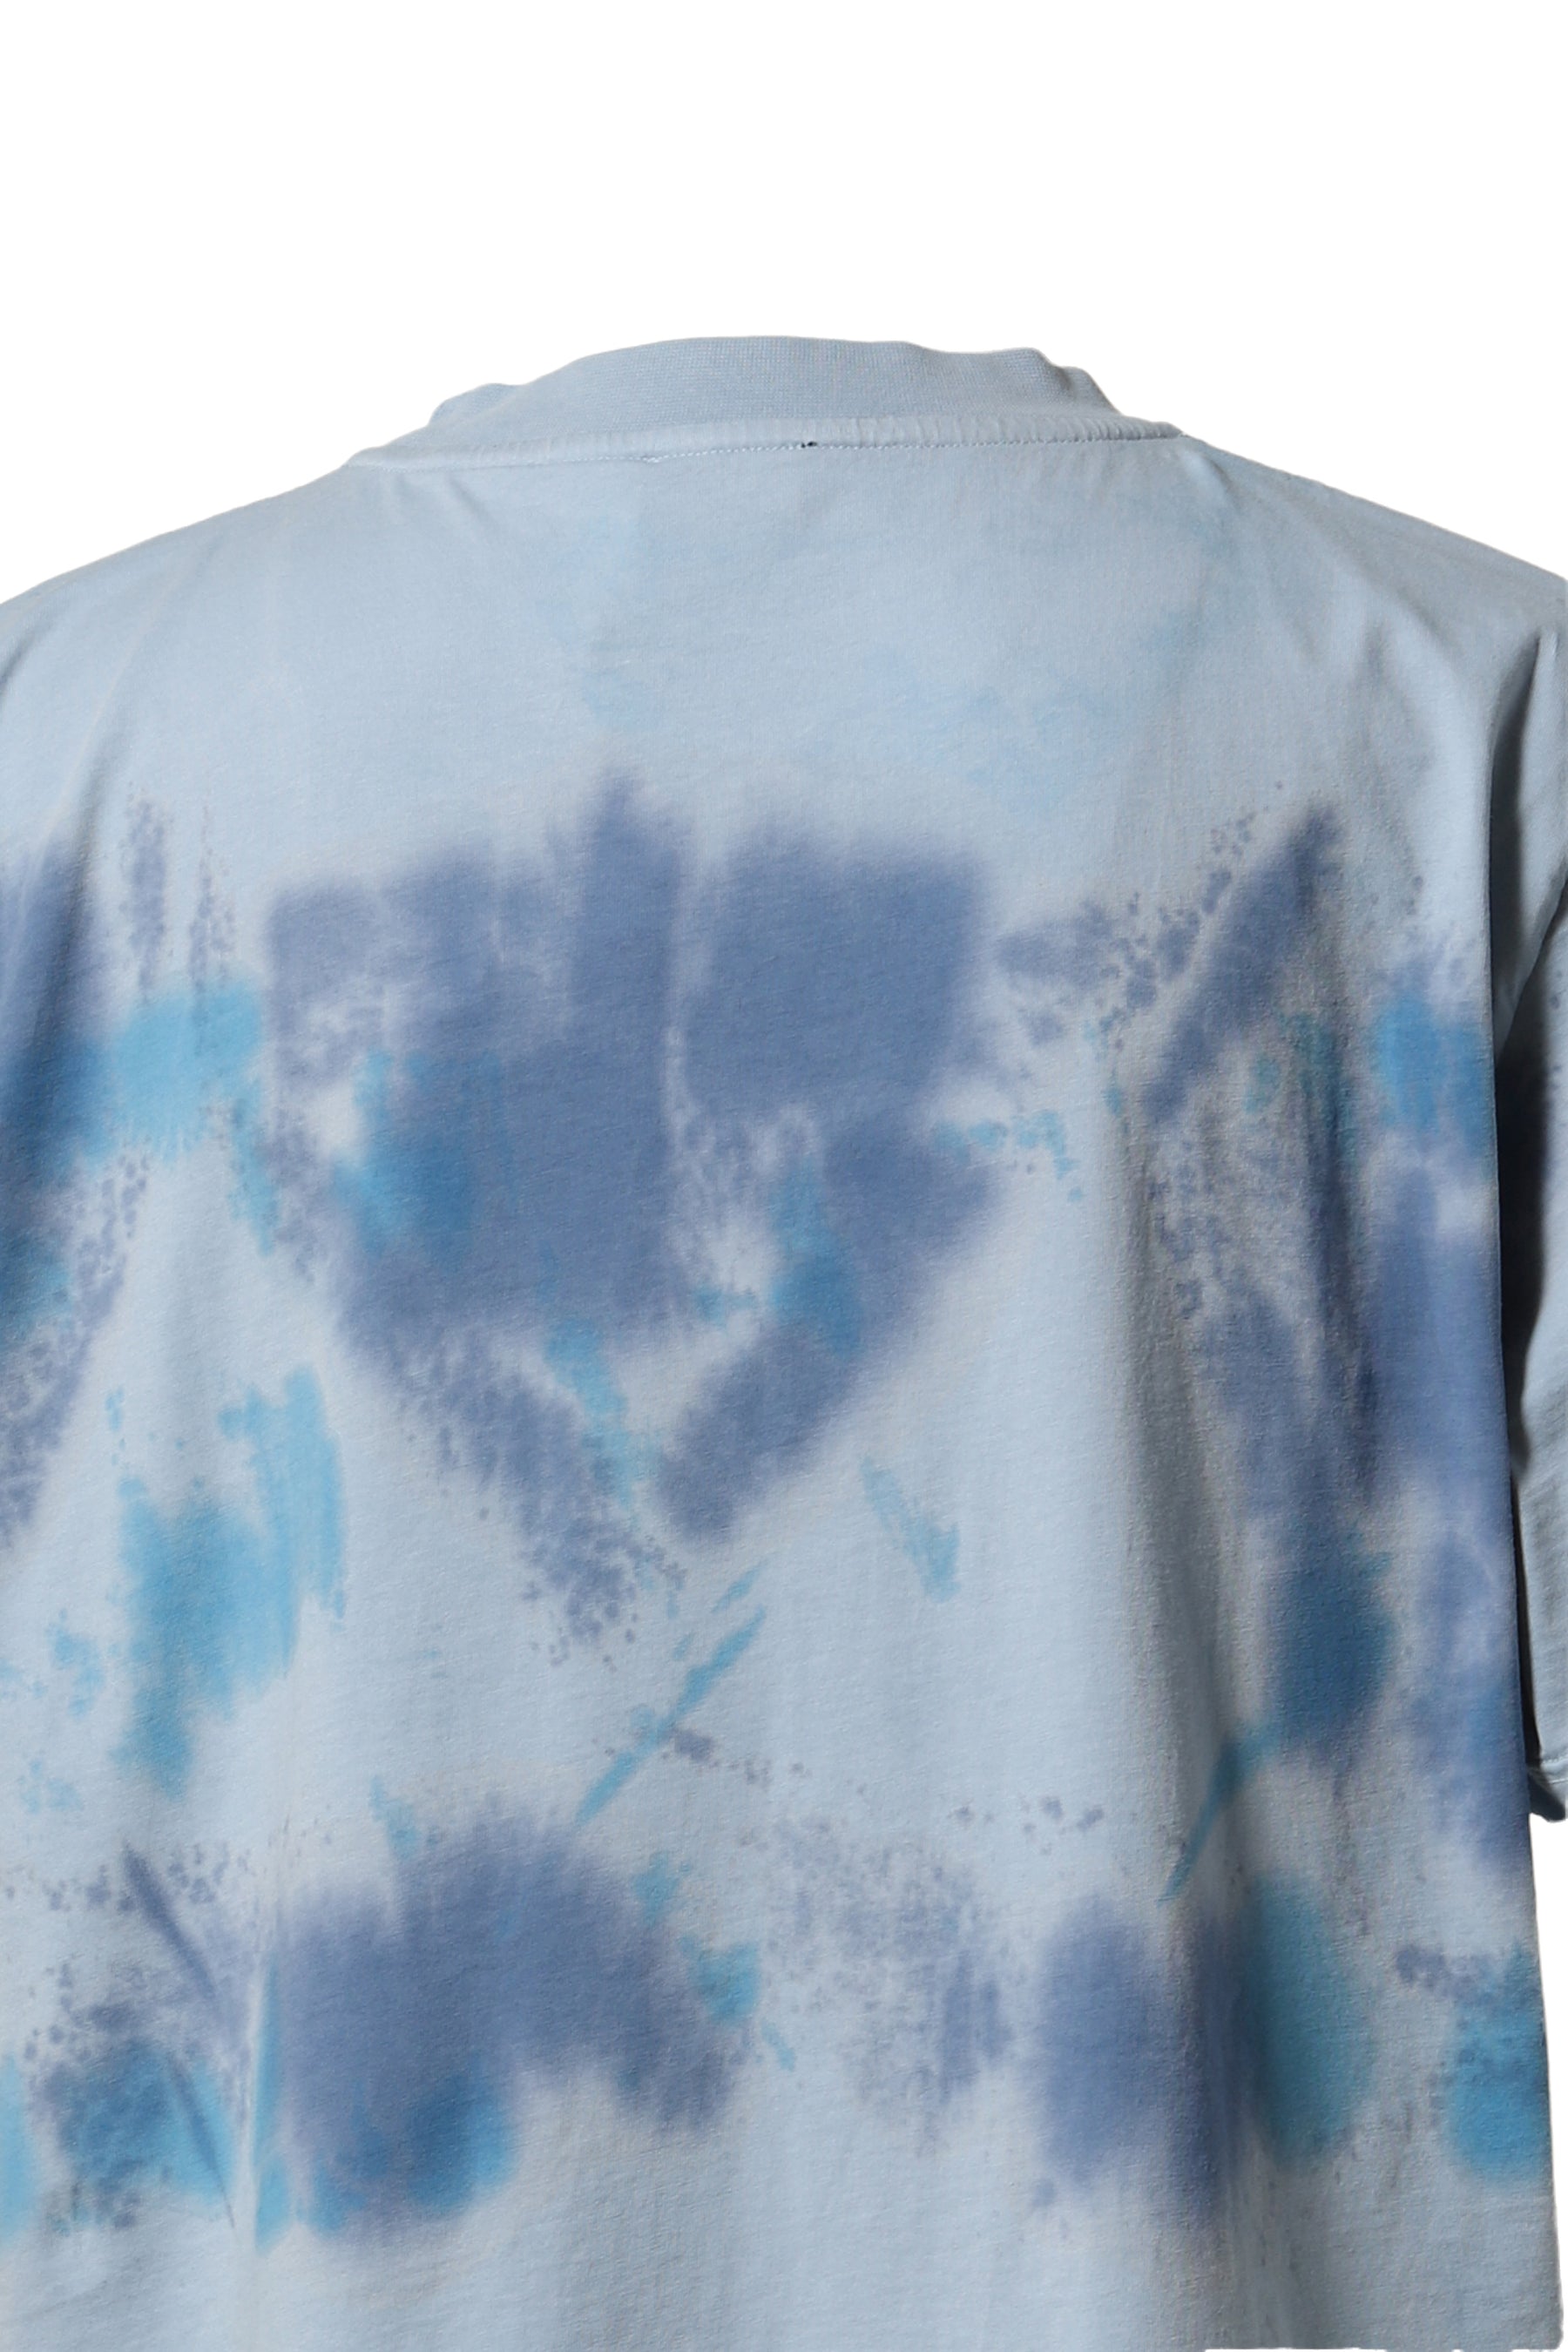 SUNBLEACHED HAND PAINTED T- SHIRT / DYE1